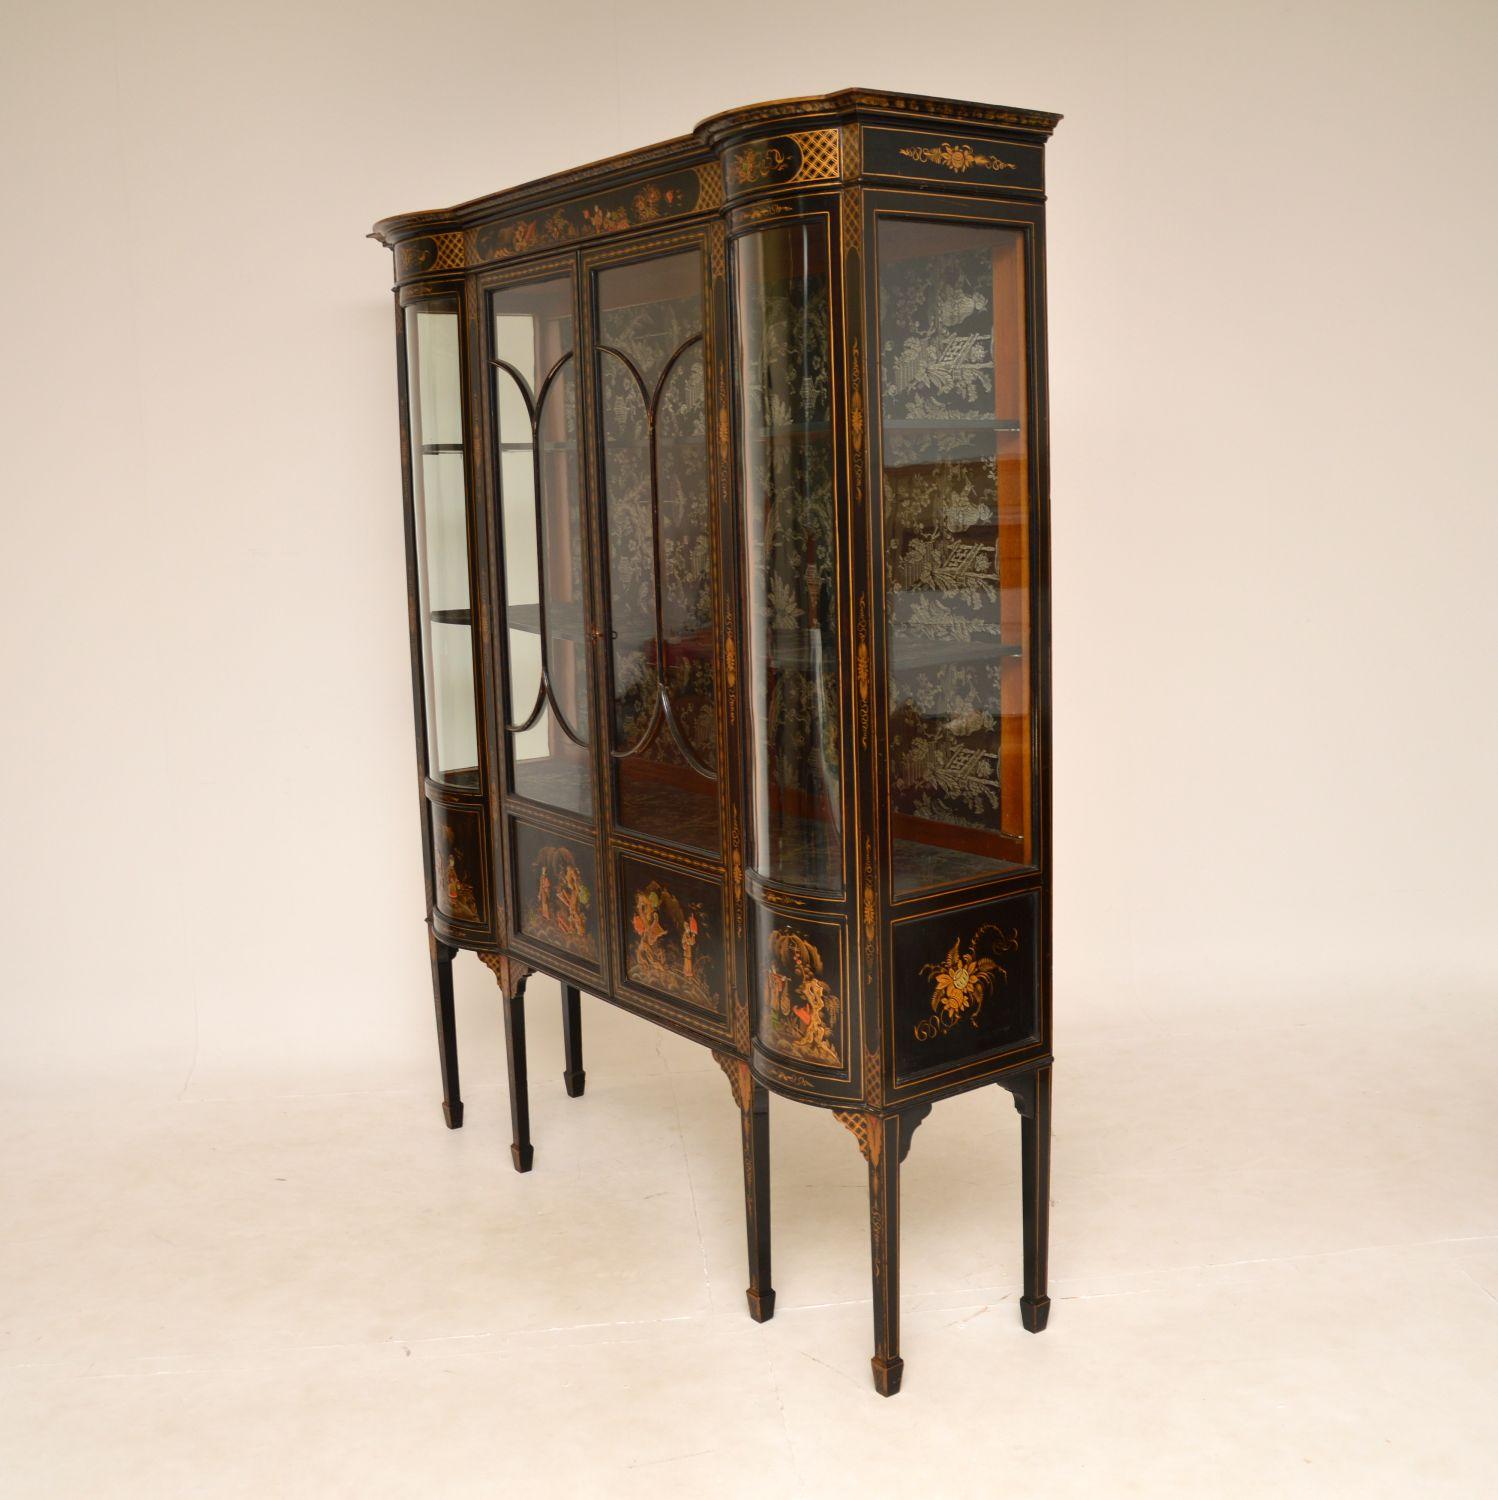 British Antique Lacquered Chinoiserie Display Cabinet